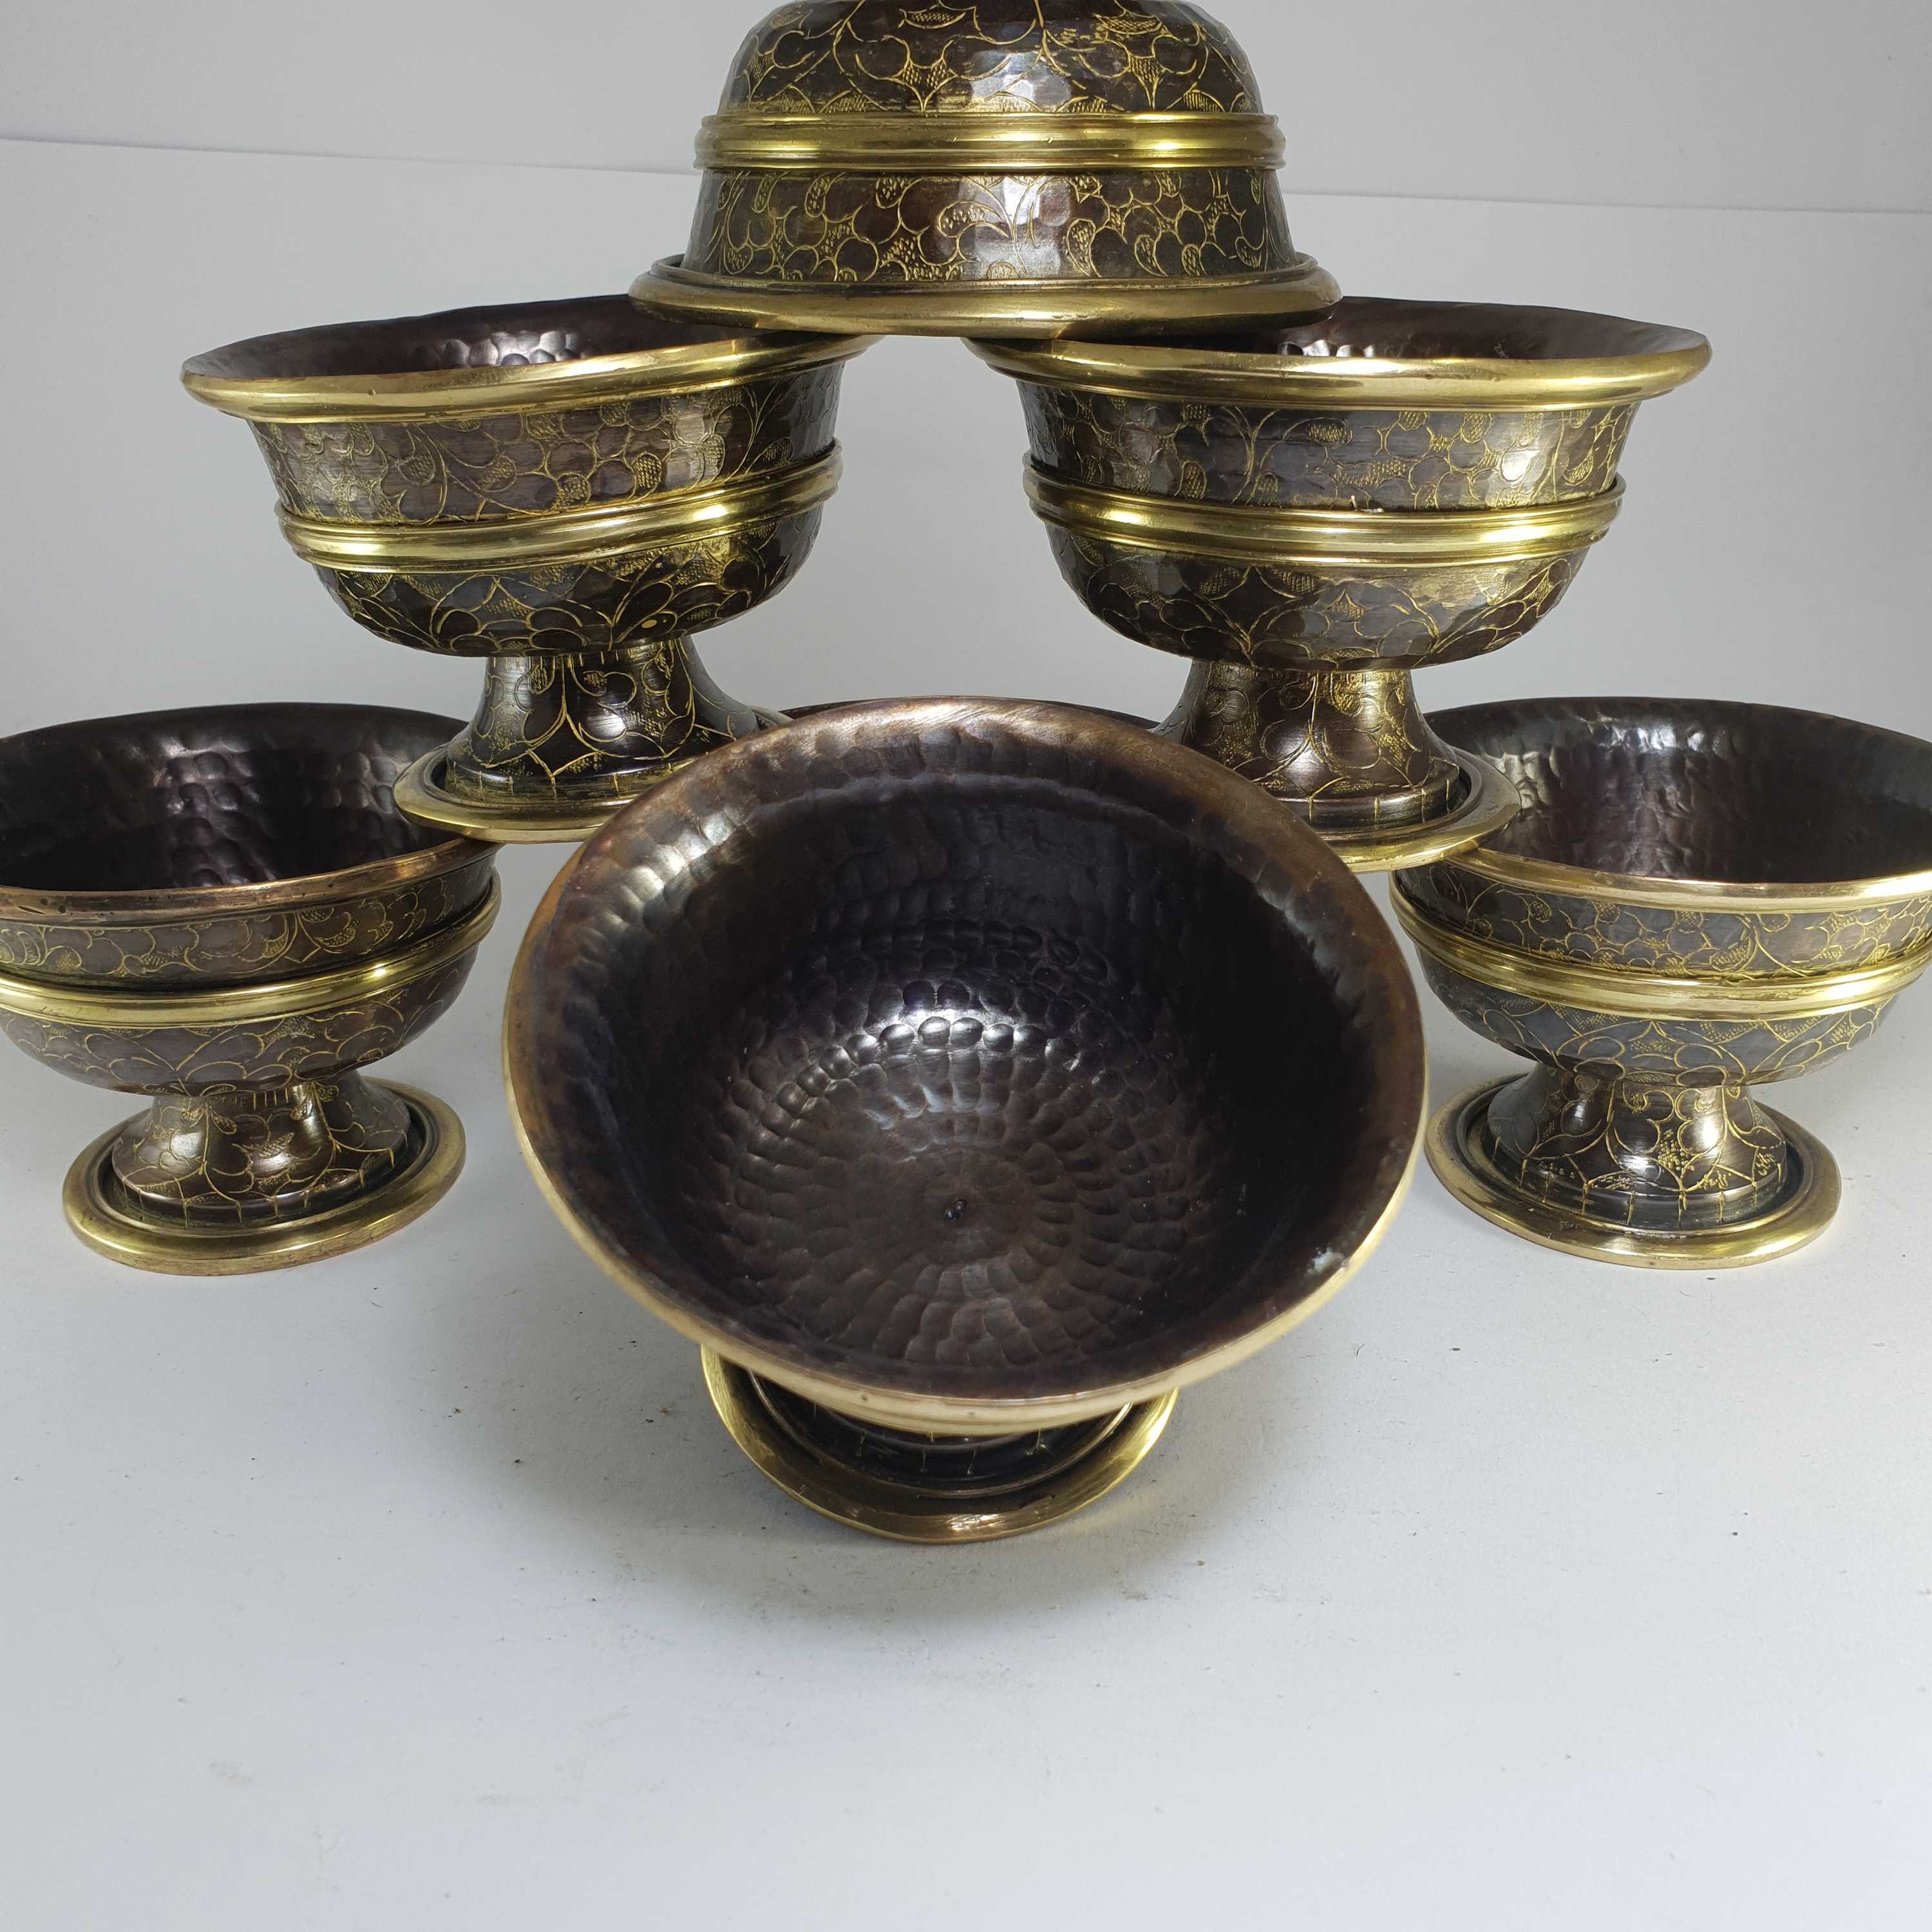 medium Copper Offering Bowl With Stand And Hand Carving 7 Pcs Set, In Antique Finishing